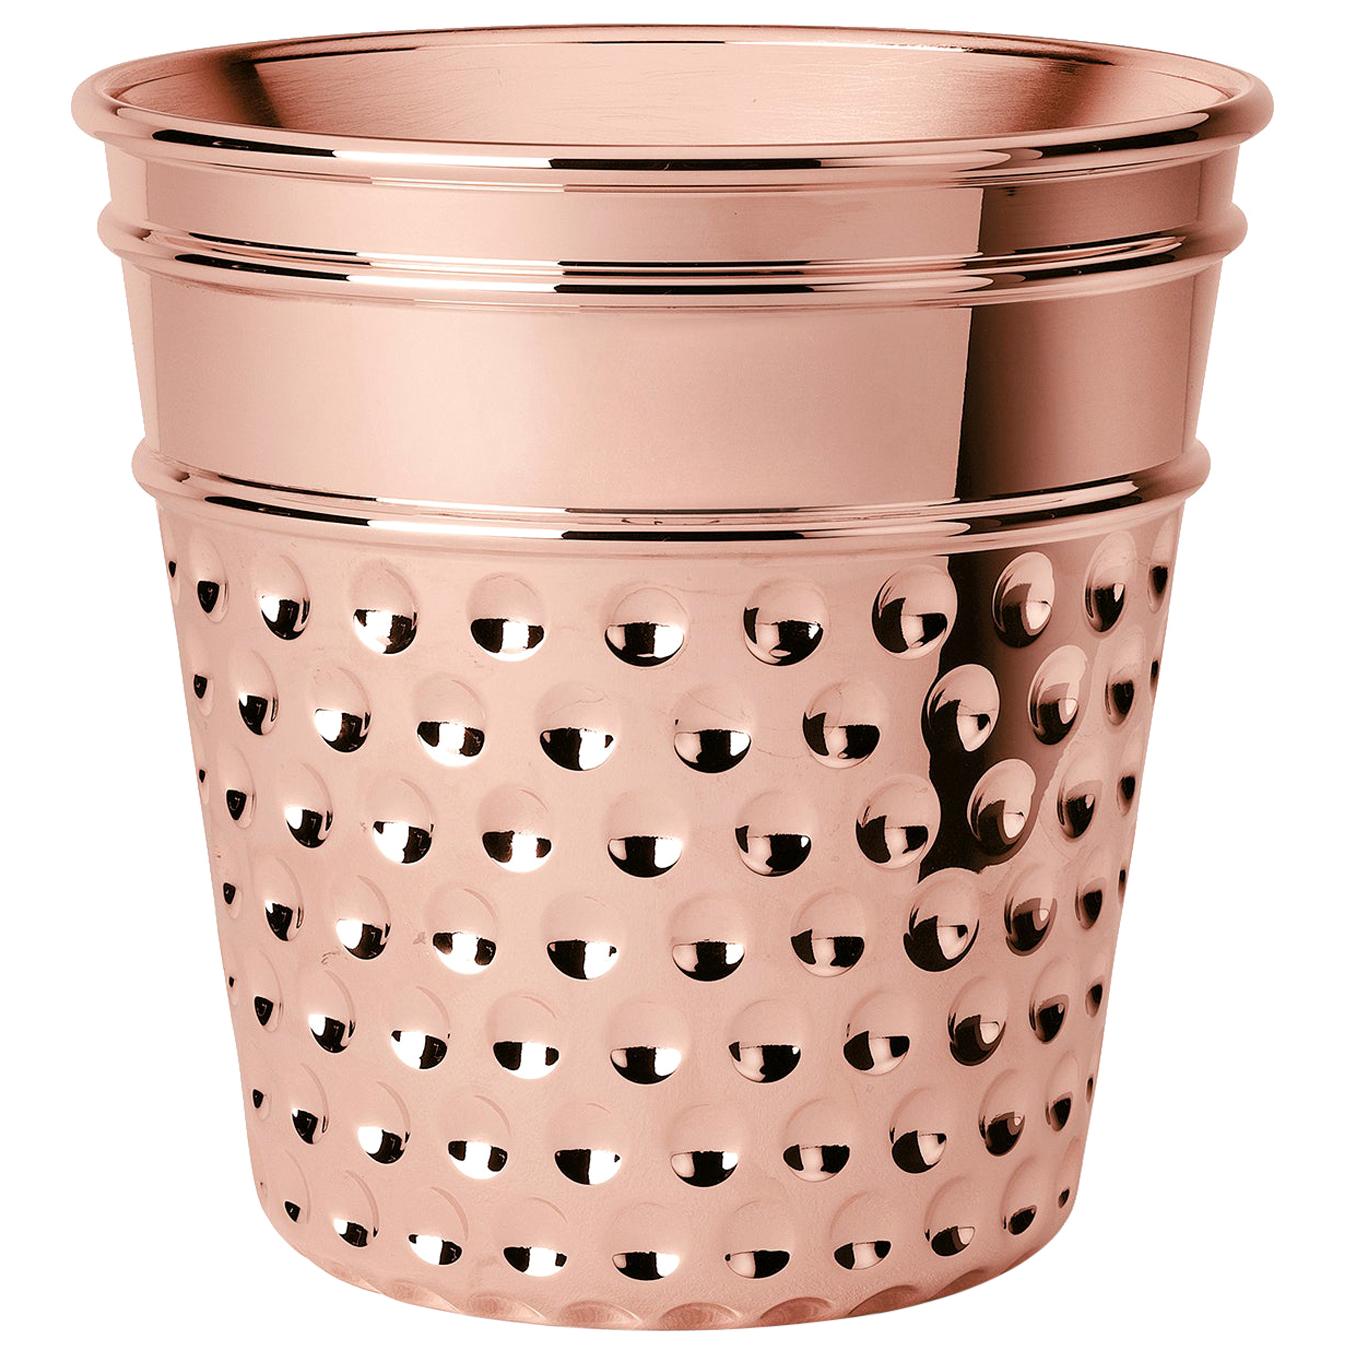 Here Ice Bucket in Copper Finish By Studio Job For Sale